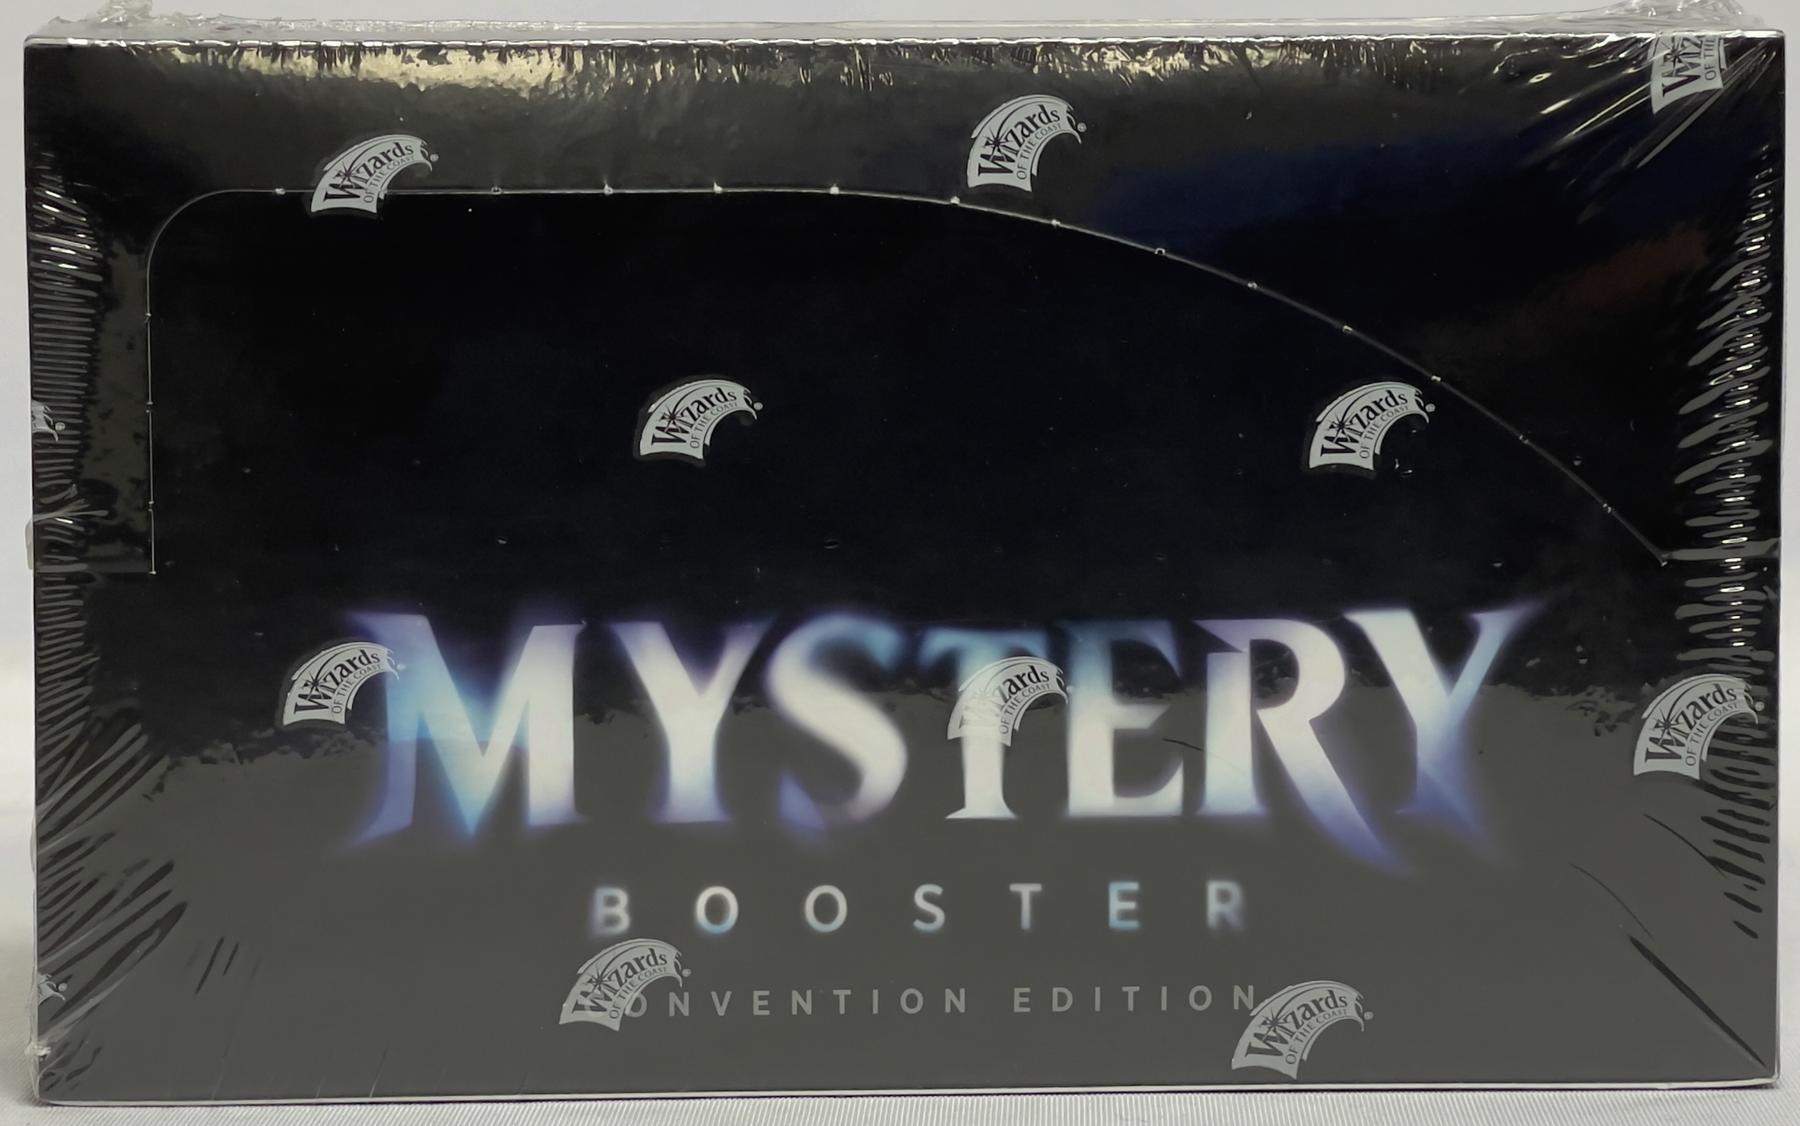 Magic the Gathering Mystery Booster Box - Convention Edition (2021 